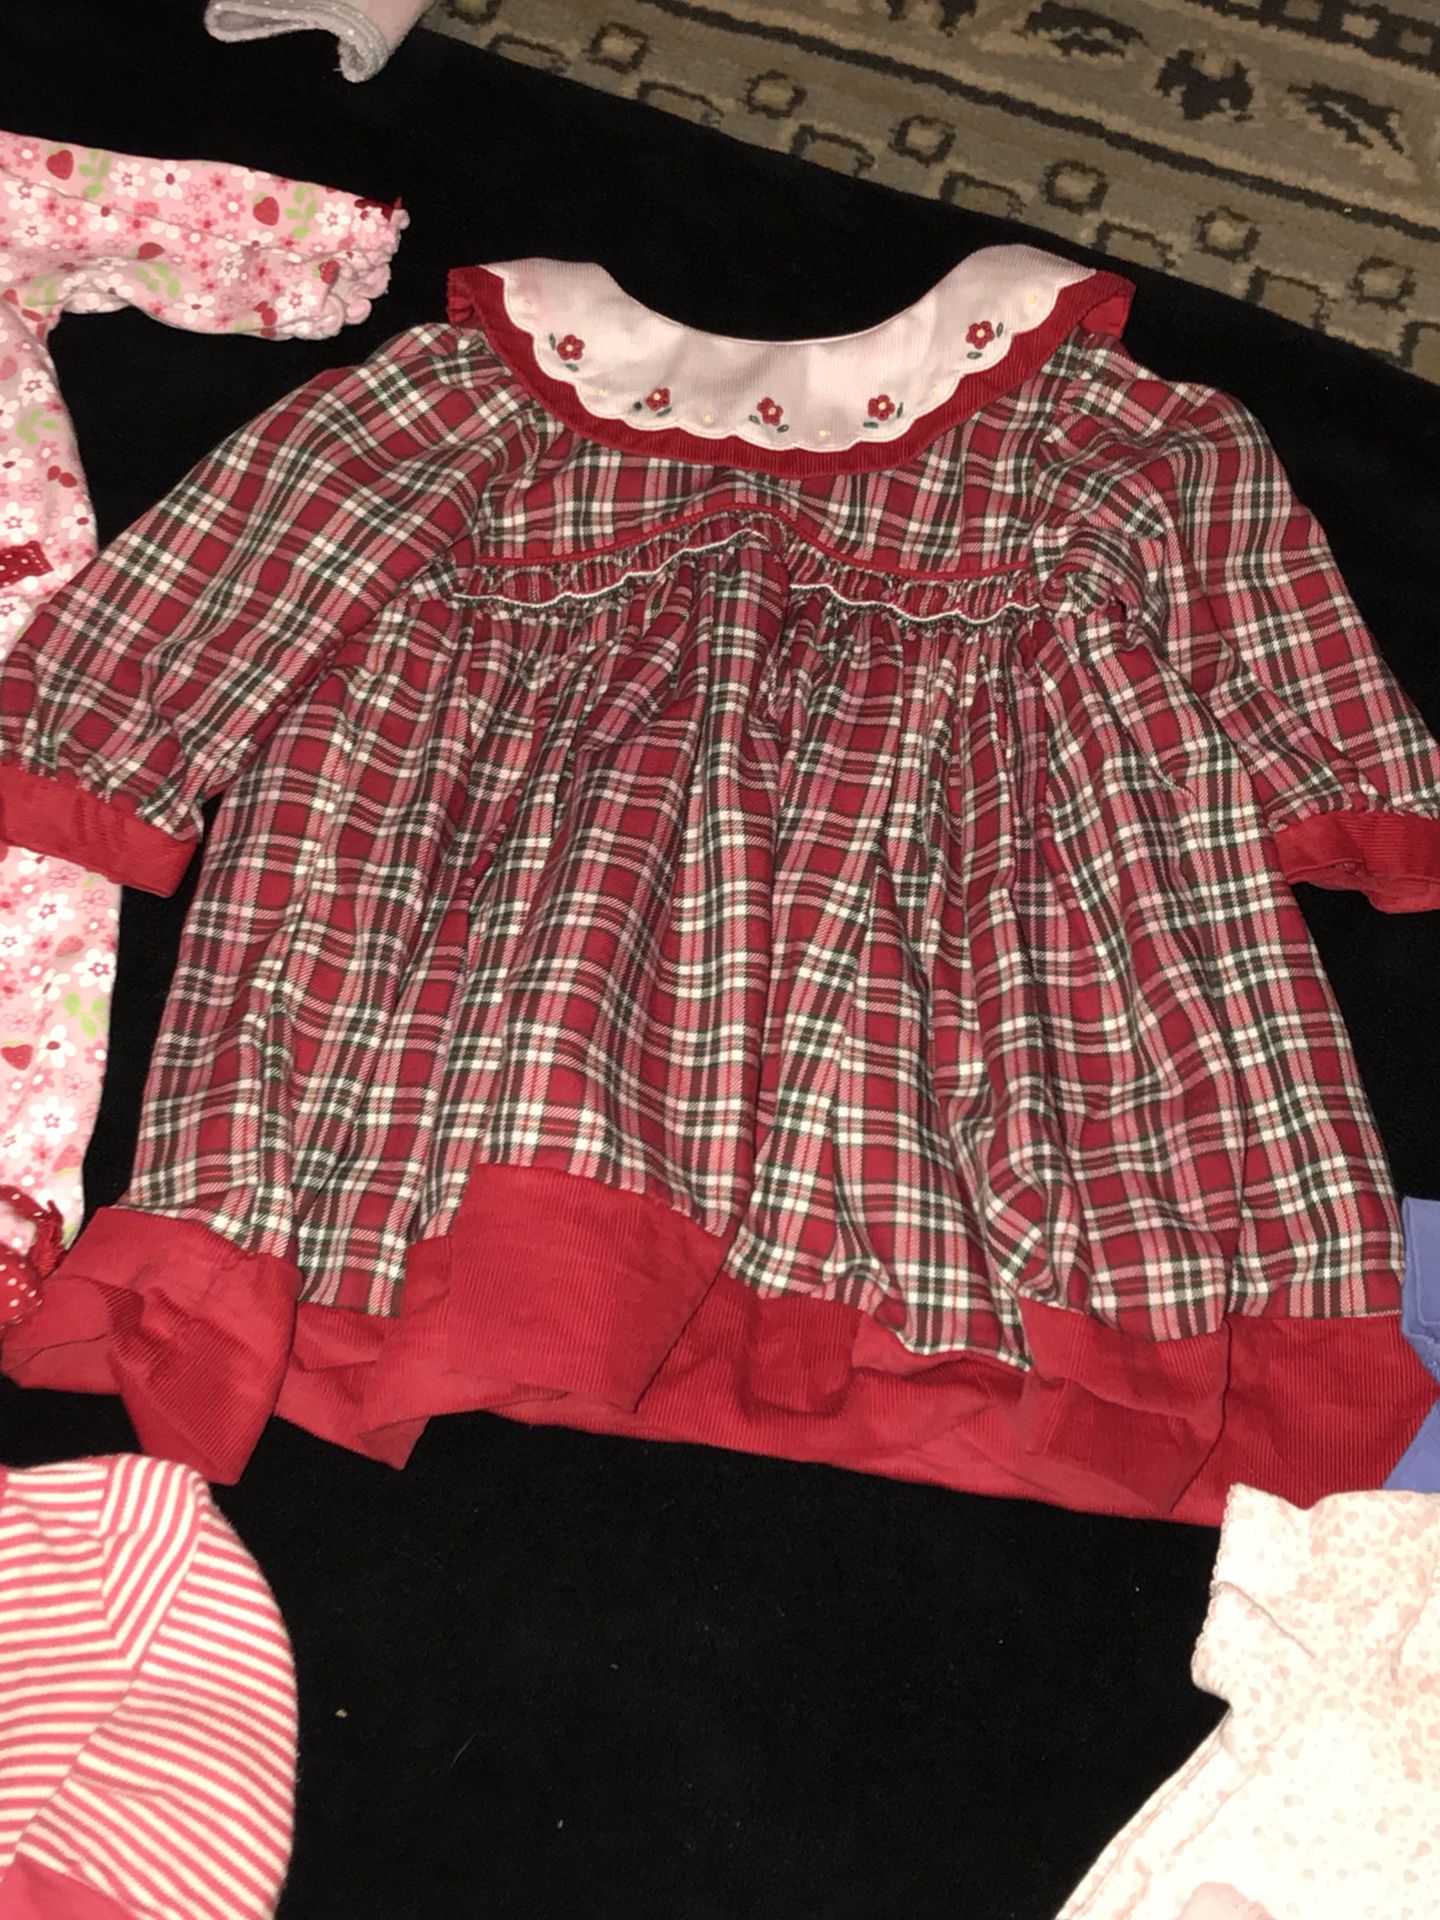 Baby clothes size newborn to youth 10. Lots and lots, mix and match from any photo. Price varies! Super great deals. Also have lots of baby accessor